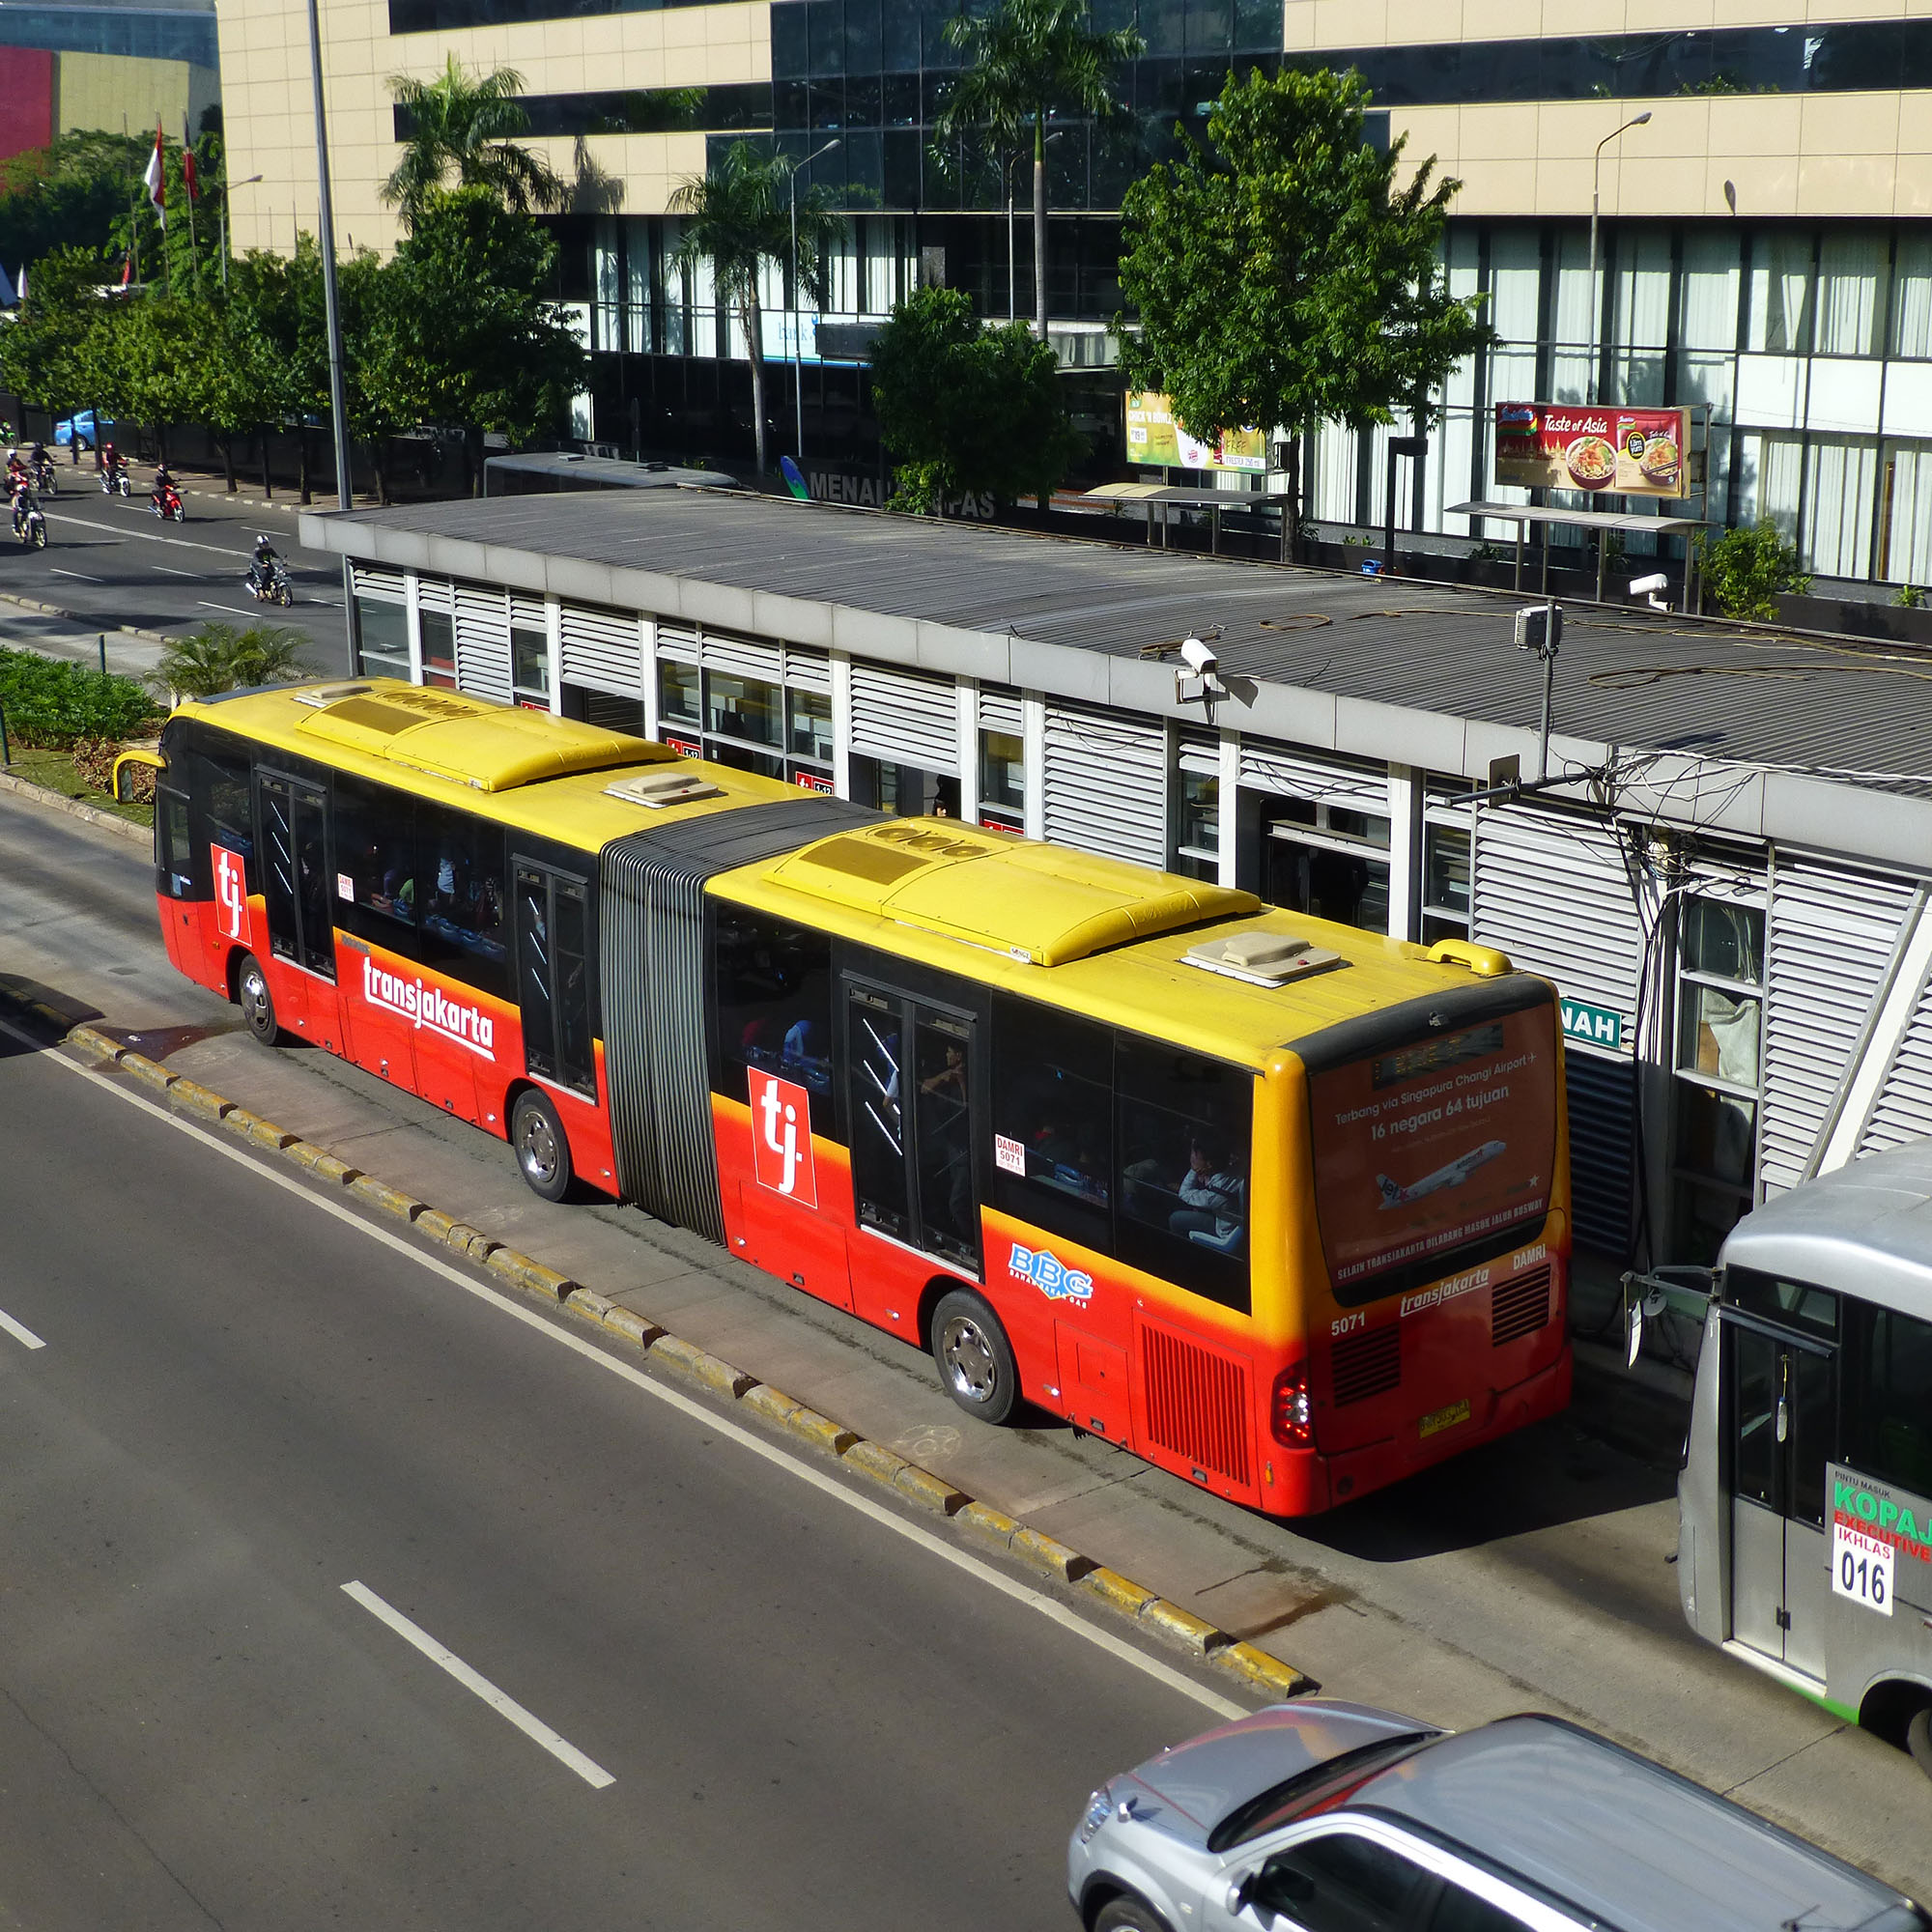 Fig. 22.12 TransJakarta utilizes buses with doorways on both sides of the vehicle in order to service both median and curbside stations.